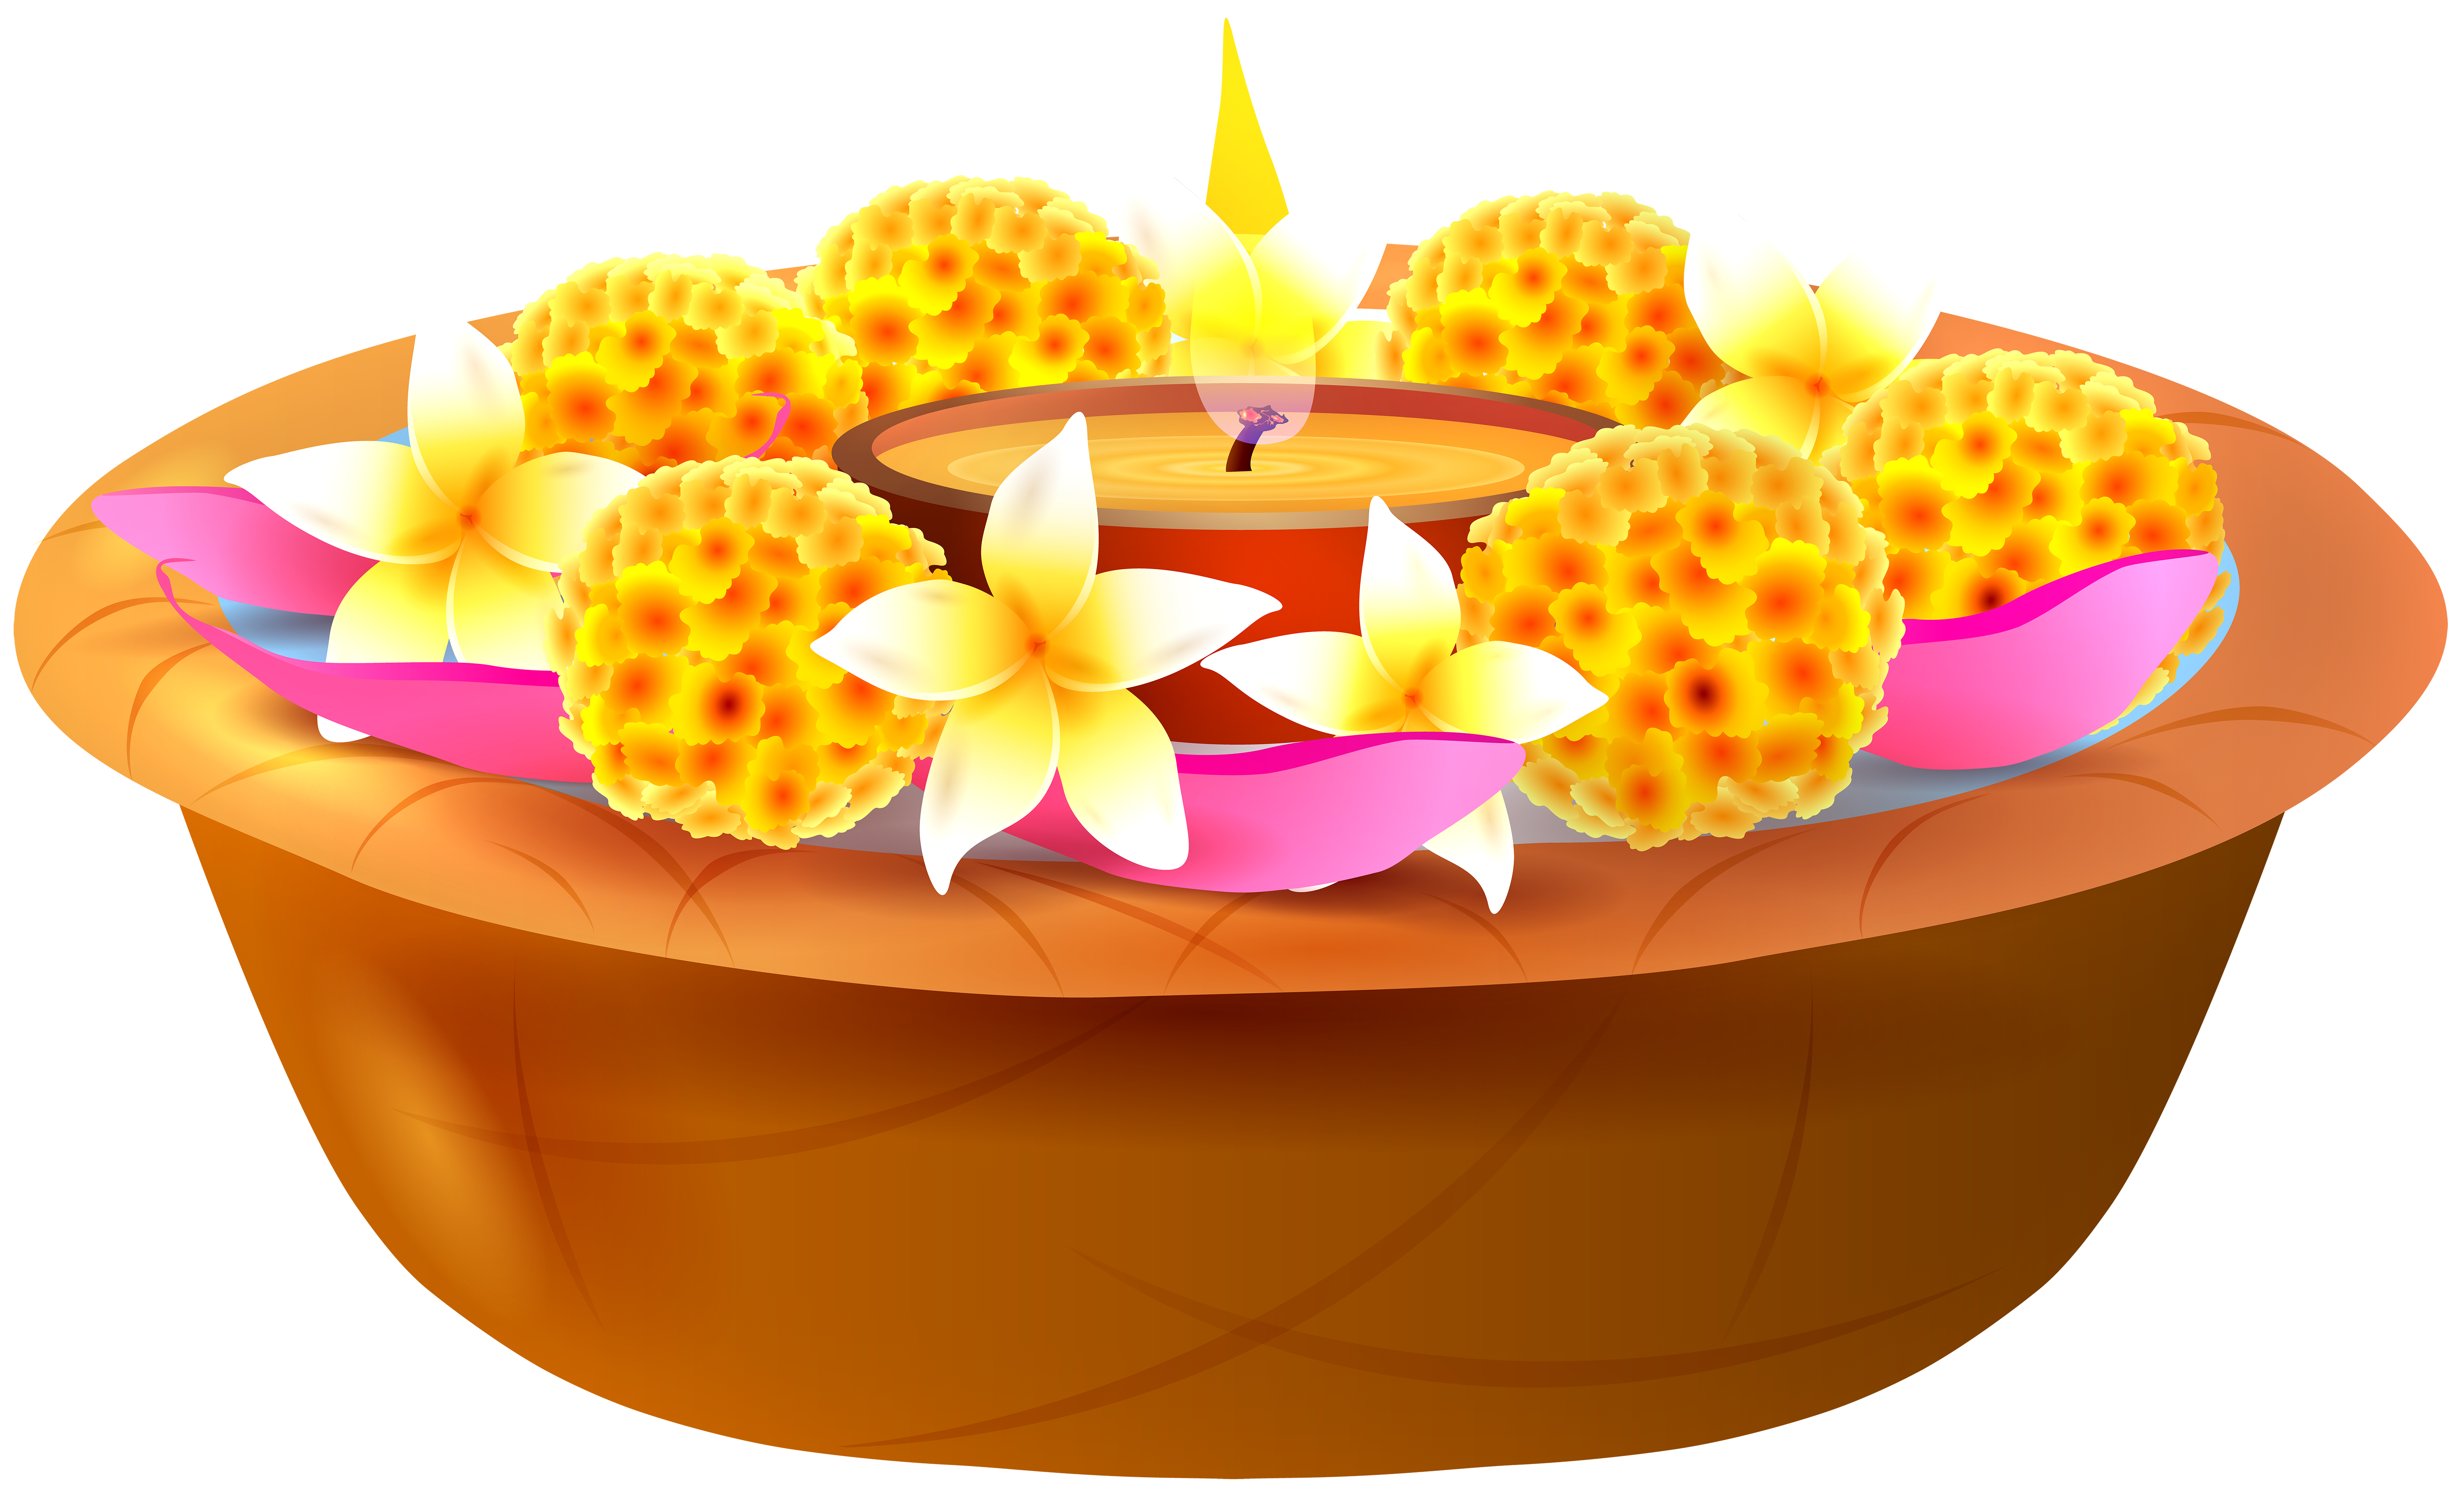 cup clipart flower